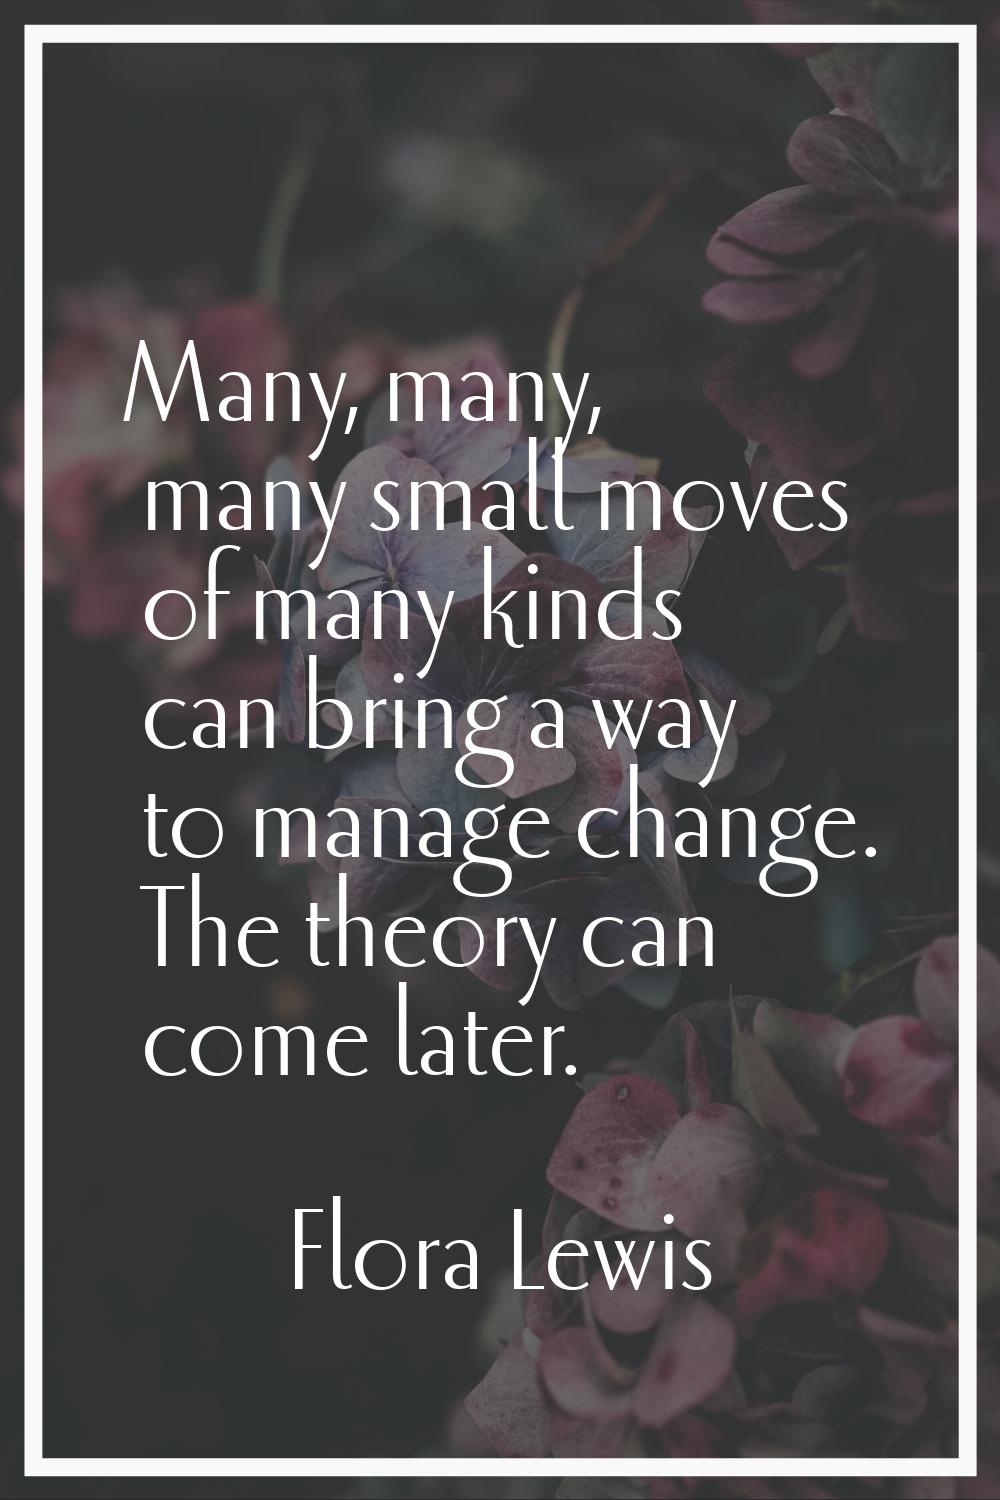 Many, many, many small moves of many kinds can bring a way to manage change. The theory can come la